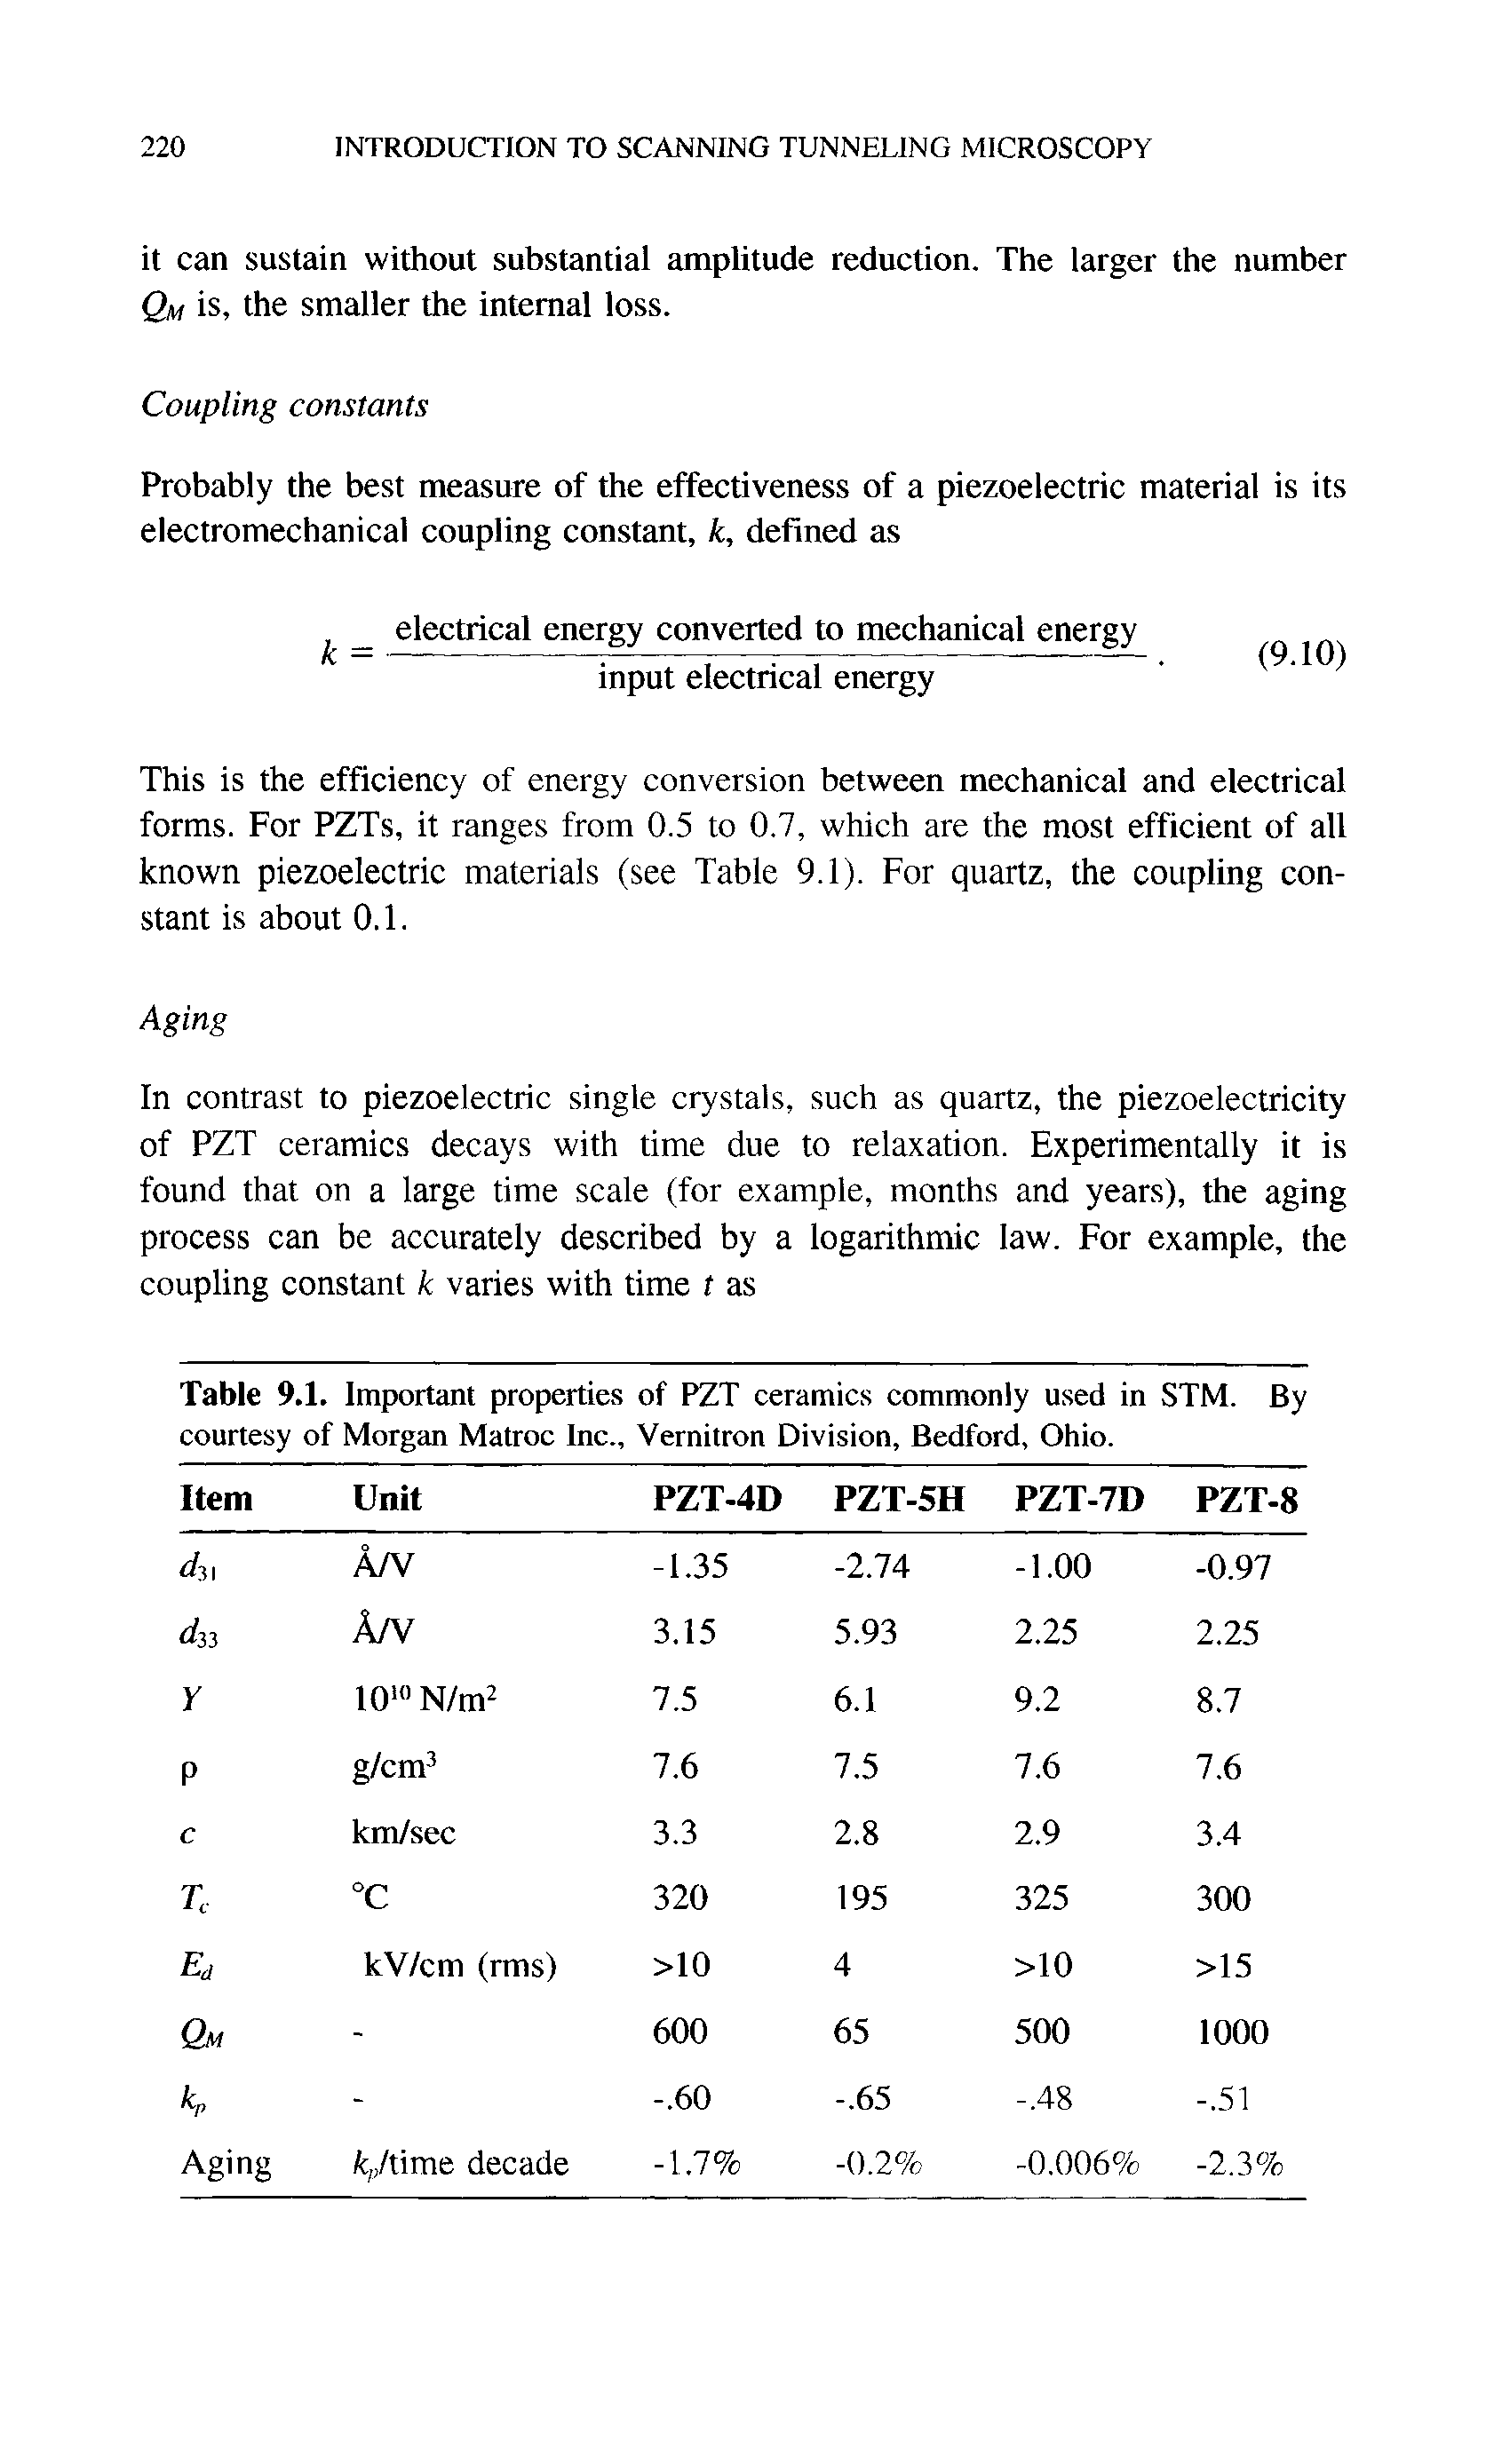 Table 9.1. Important properties of PZT ceramics commonly used in courtesy of Morgan Matroc Inc., Vernitron Division, Bedford, Ohio. STM. By...